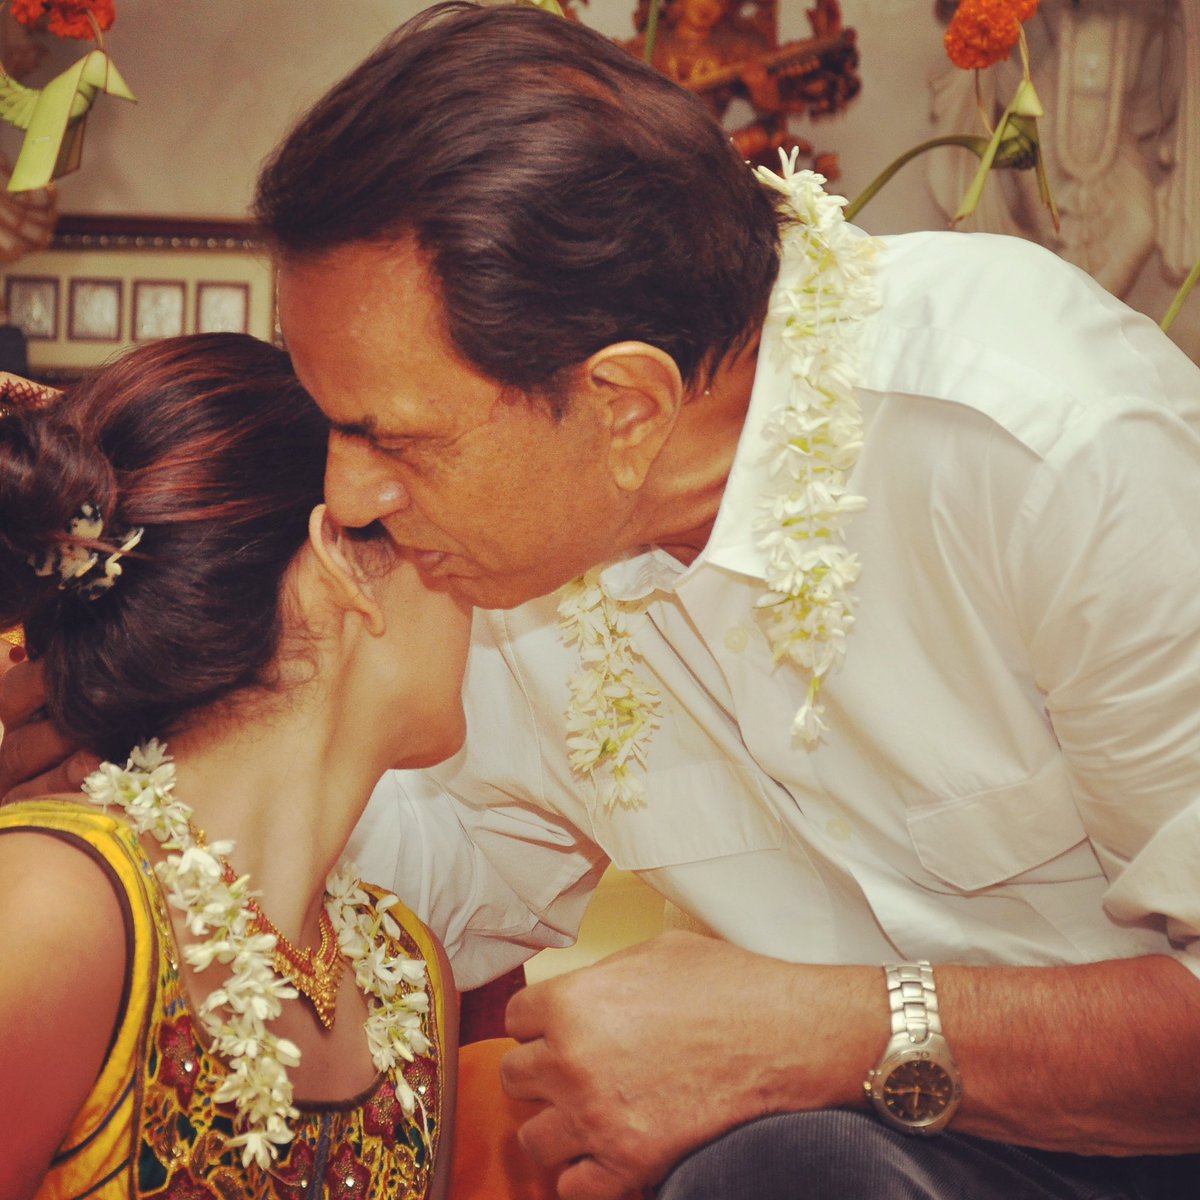 Happy Fathers Day papa love you @aapkadharam 🤗😍♥️🧿😘 #fatherdaughter #HappyFarthersDay #FatherDay